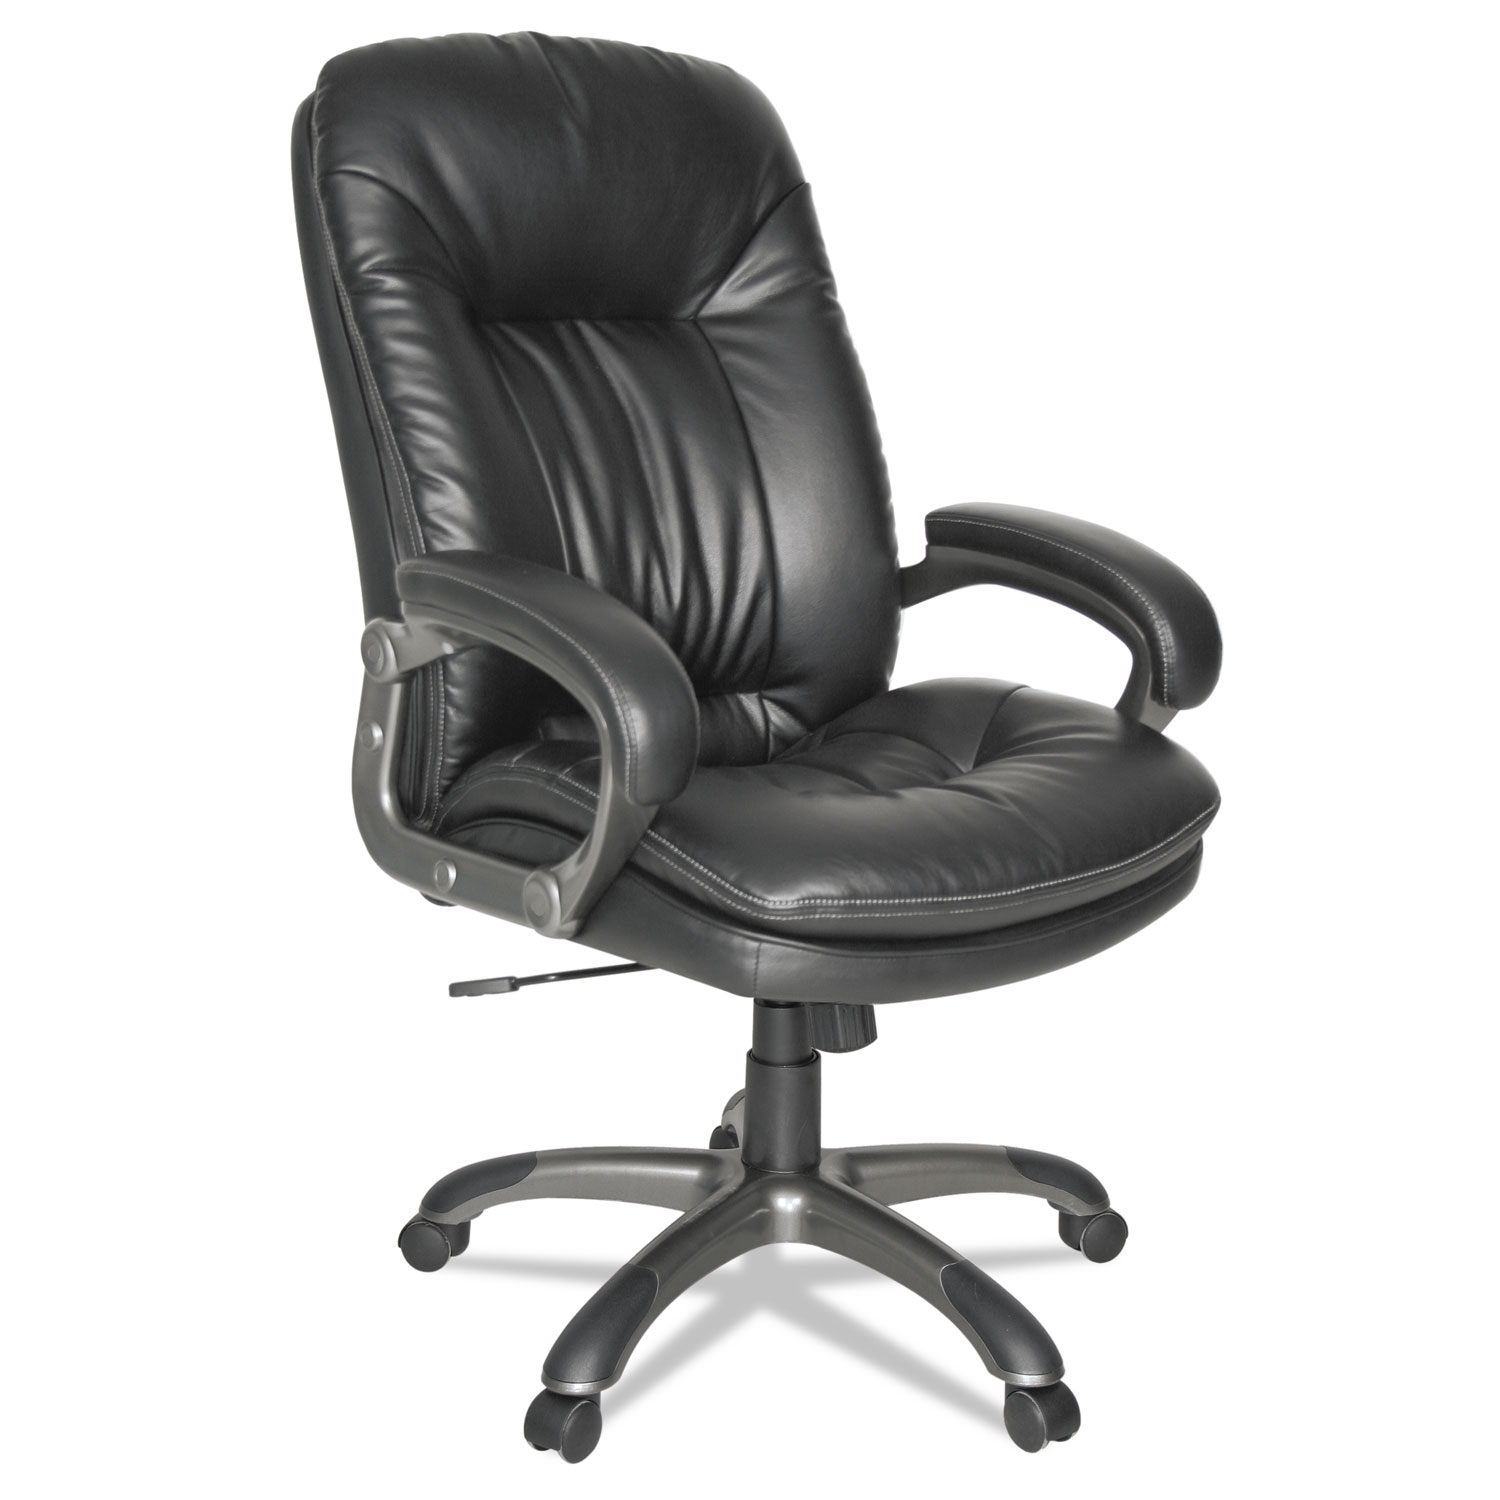  OIF OIFGM4119 Executive Swivel/Tilt Leather High-Back Chair, Supports up to 250 lbs., Black Seat/Black Back, Black Base (OIFGM4119) 